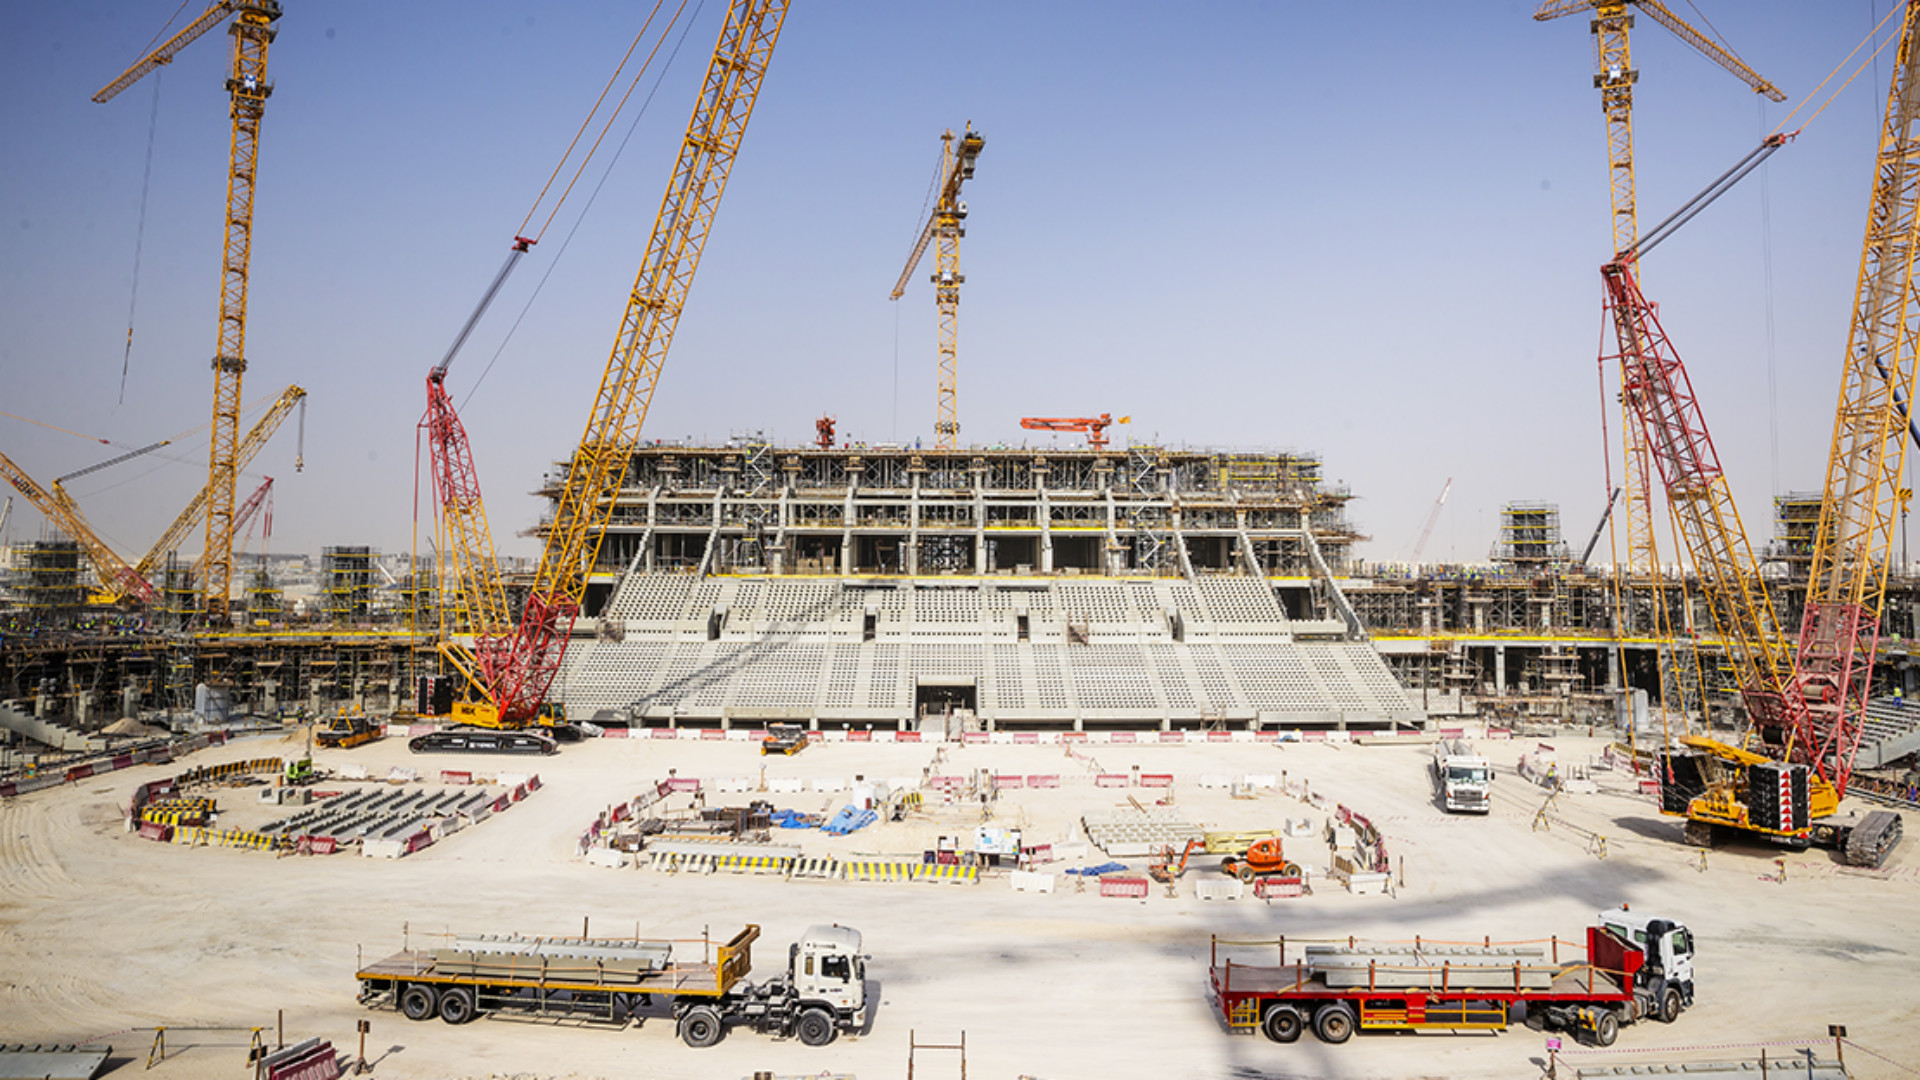 '2022 Qatar World Cup has been a model on how to improve workers